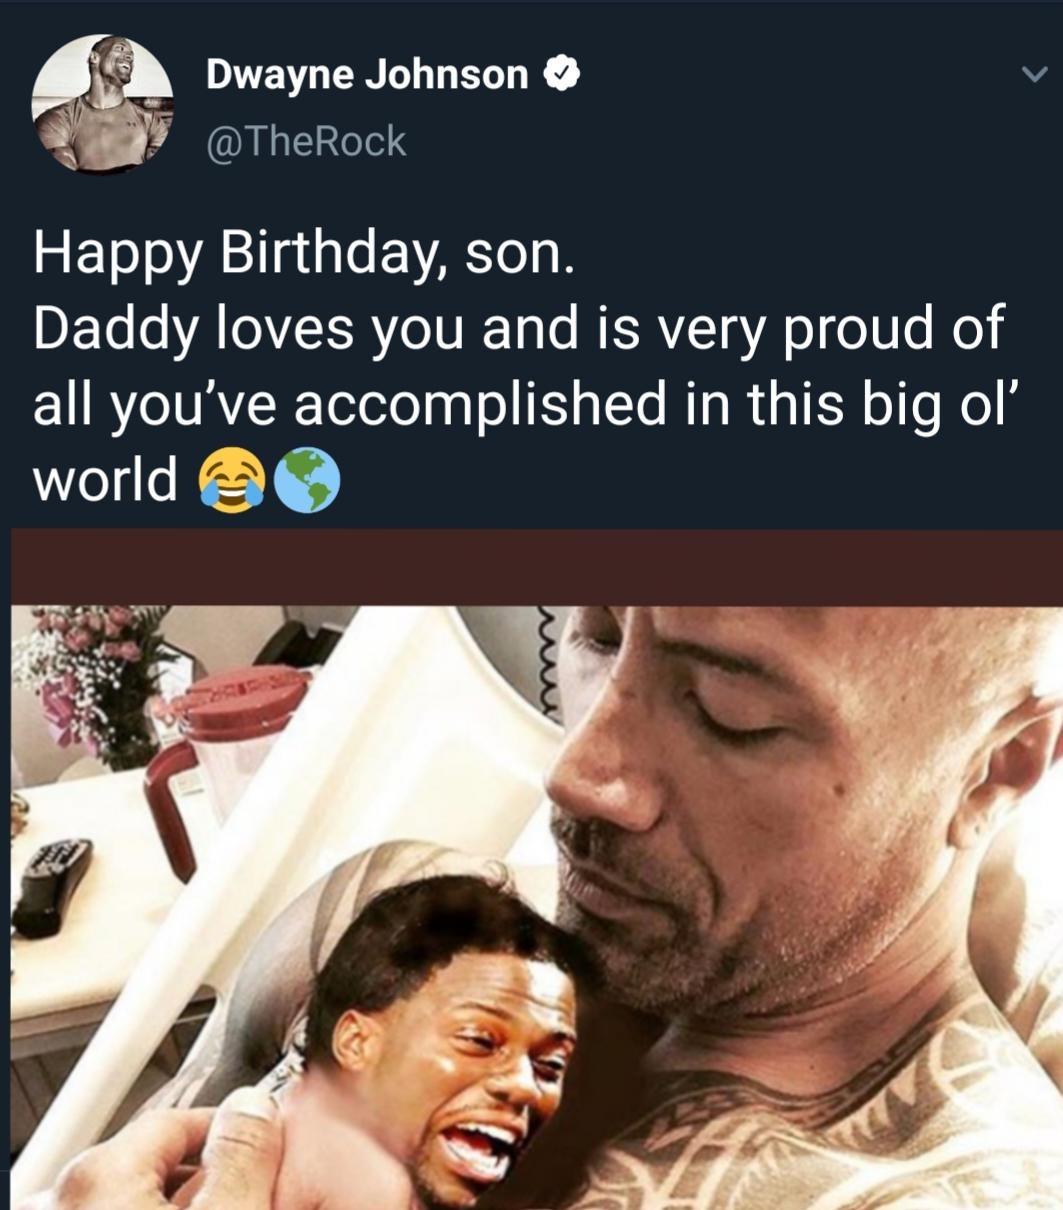 Happy birthday son. Let's not fotget this tweet from The Rock - meme